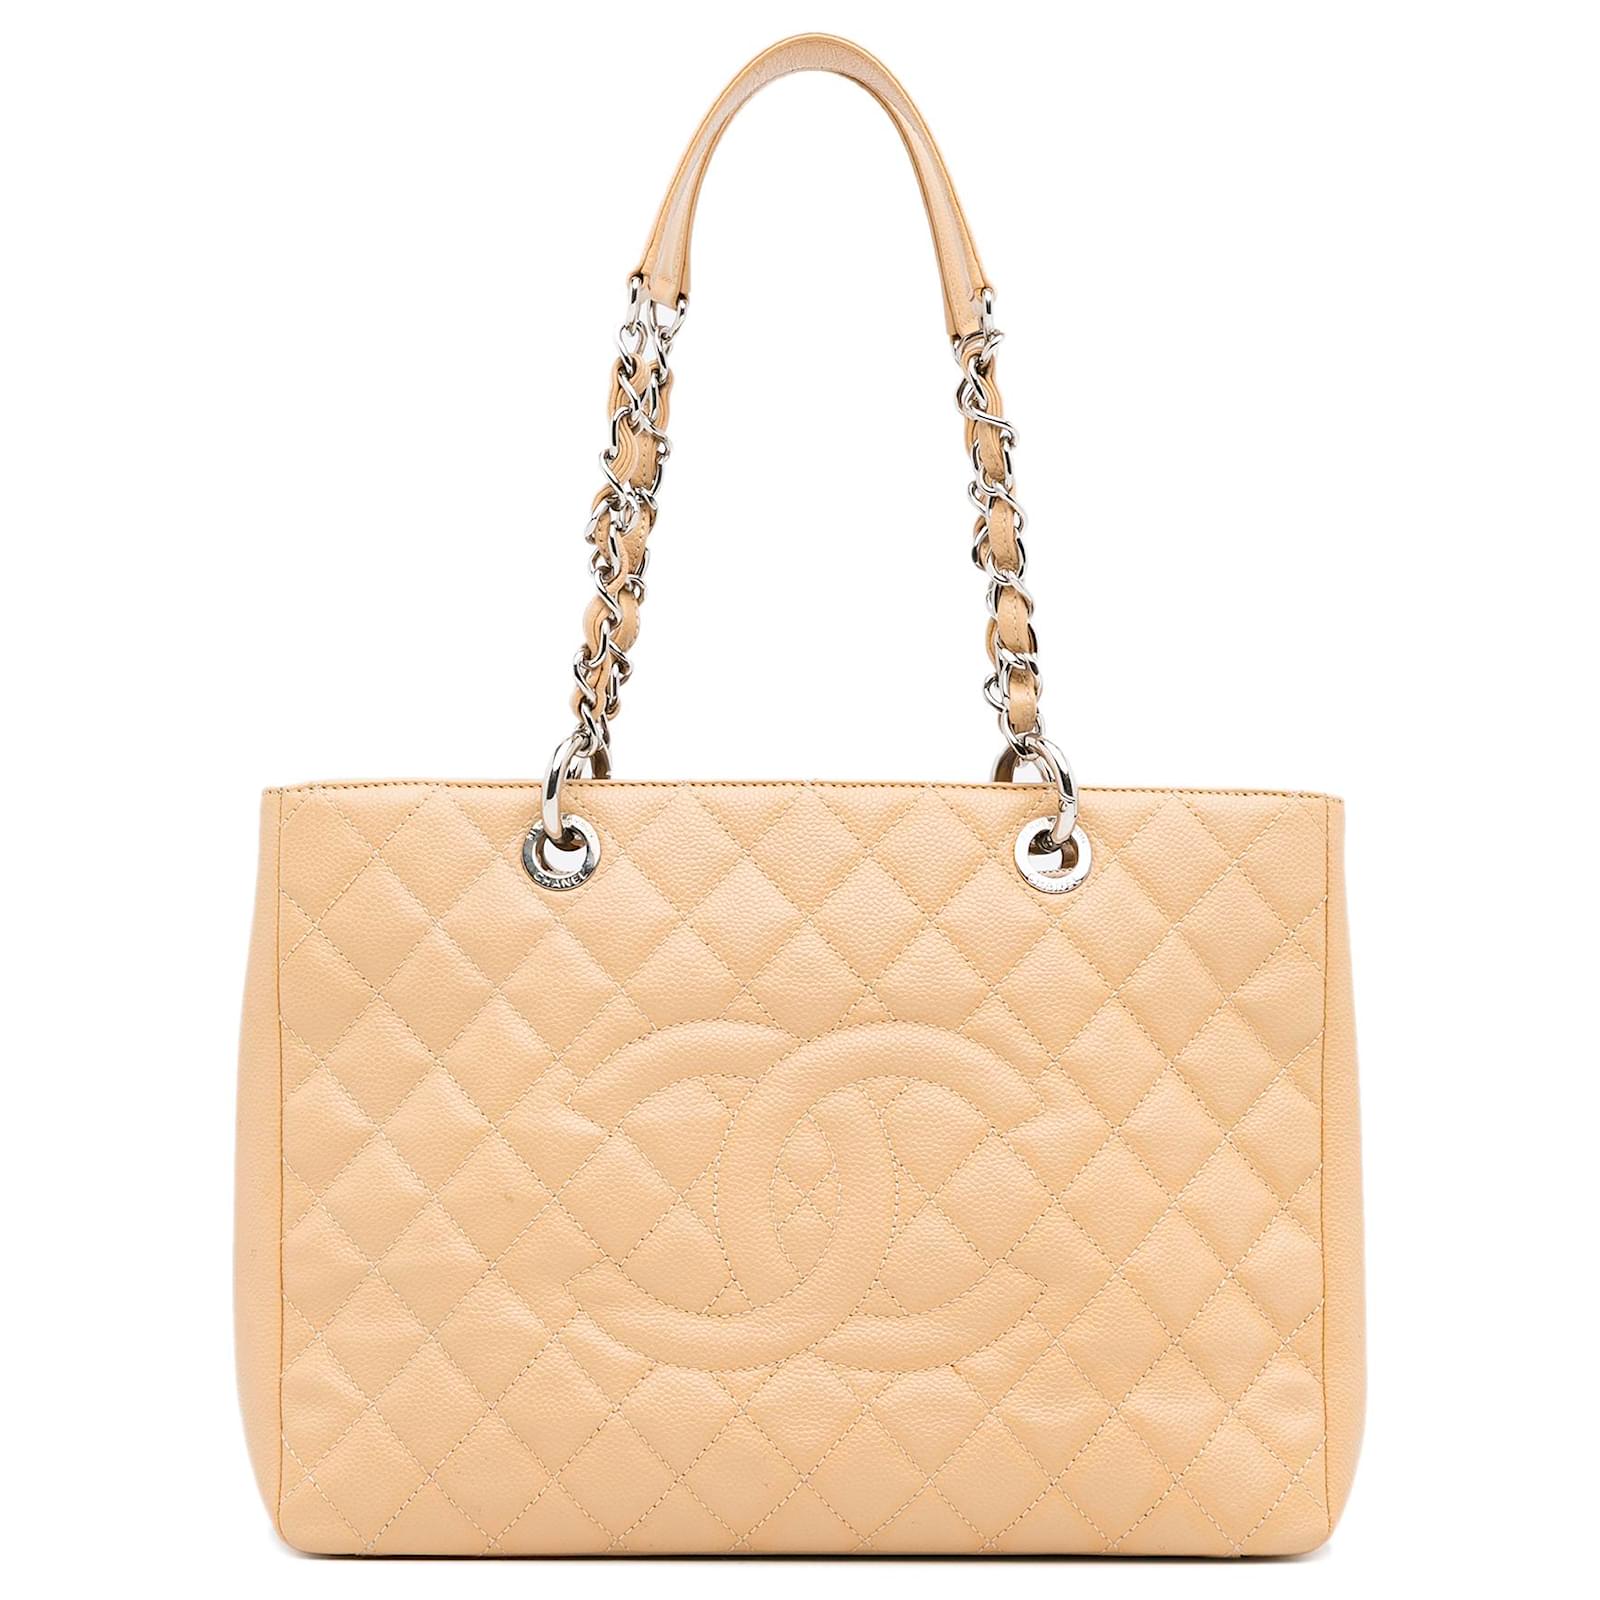 Sold at Auction: CHANEL Caviar Leather Grand Shopper Tote (GST) Bag